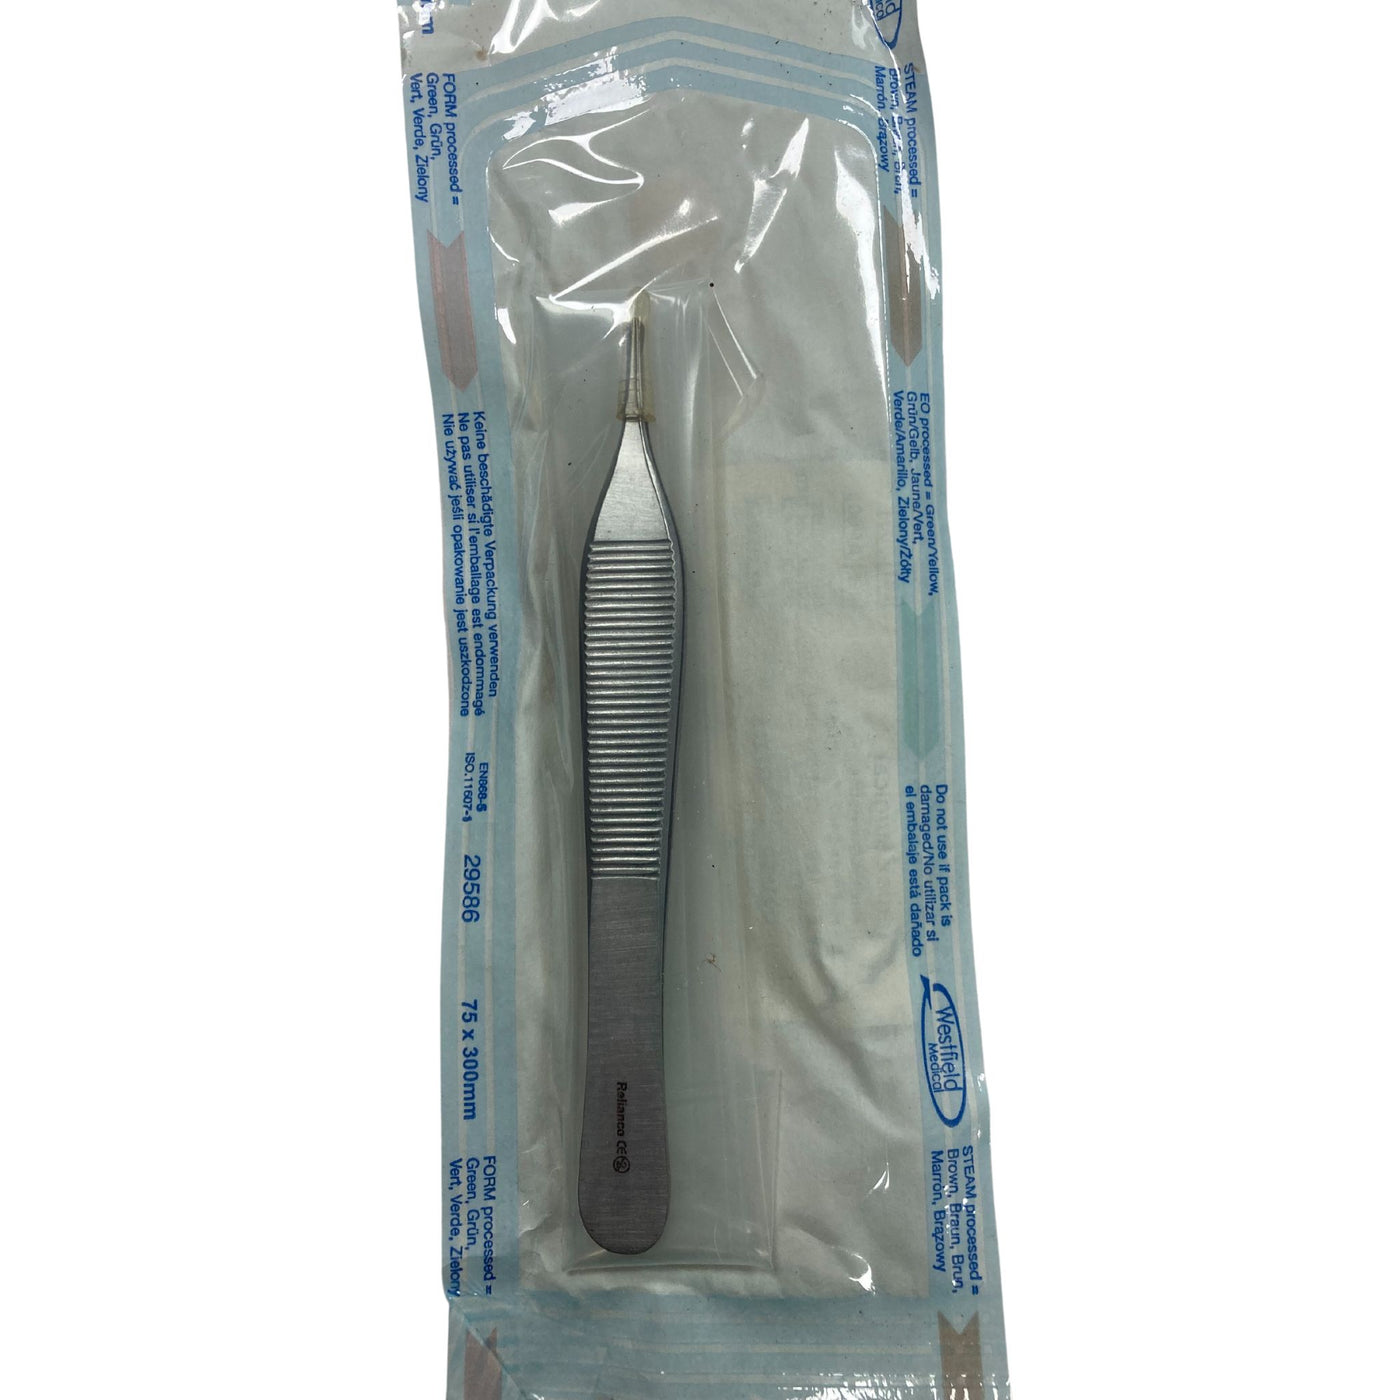 CLEARANCE - Adson Toothed Forcep 1.7mm Teeth in sterile package